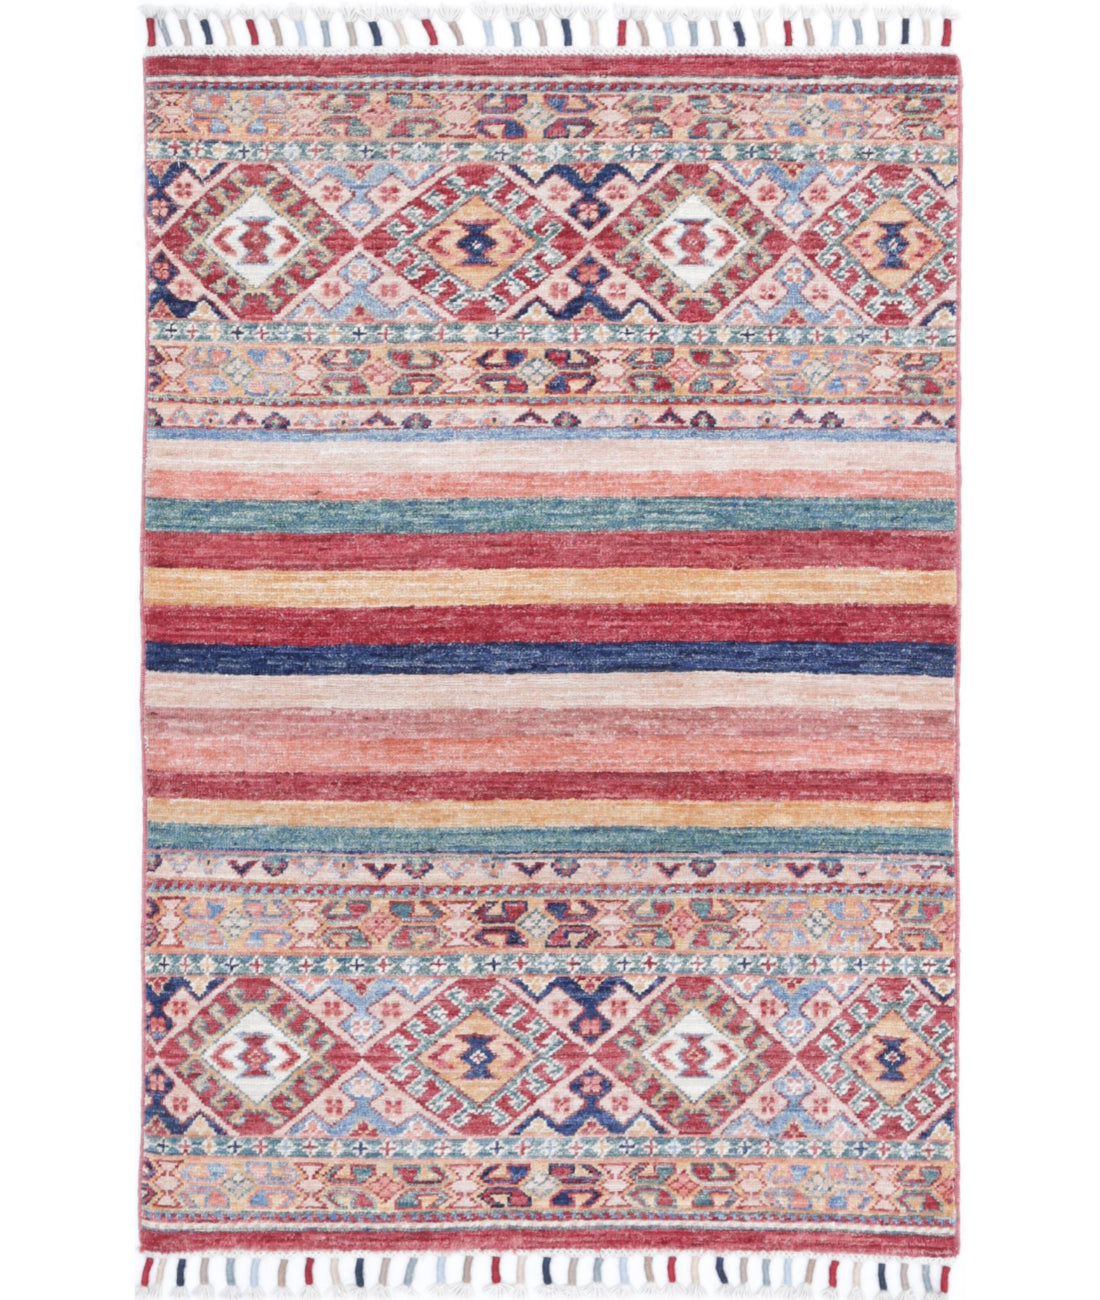 Hand Knotted Khurjeen Wool Rug - 2'6'' x 3'10'' 2'6'' x 3'10'' (75 X 115) / Multi / Multi